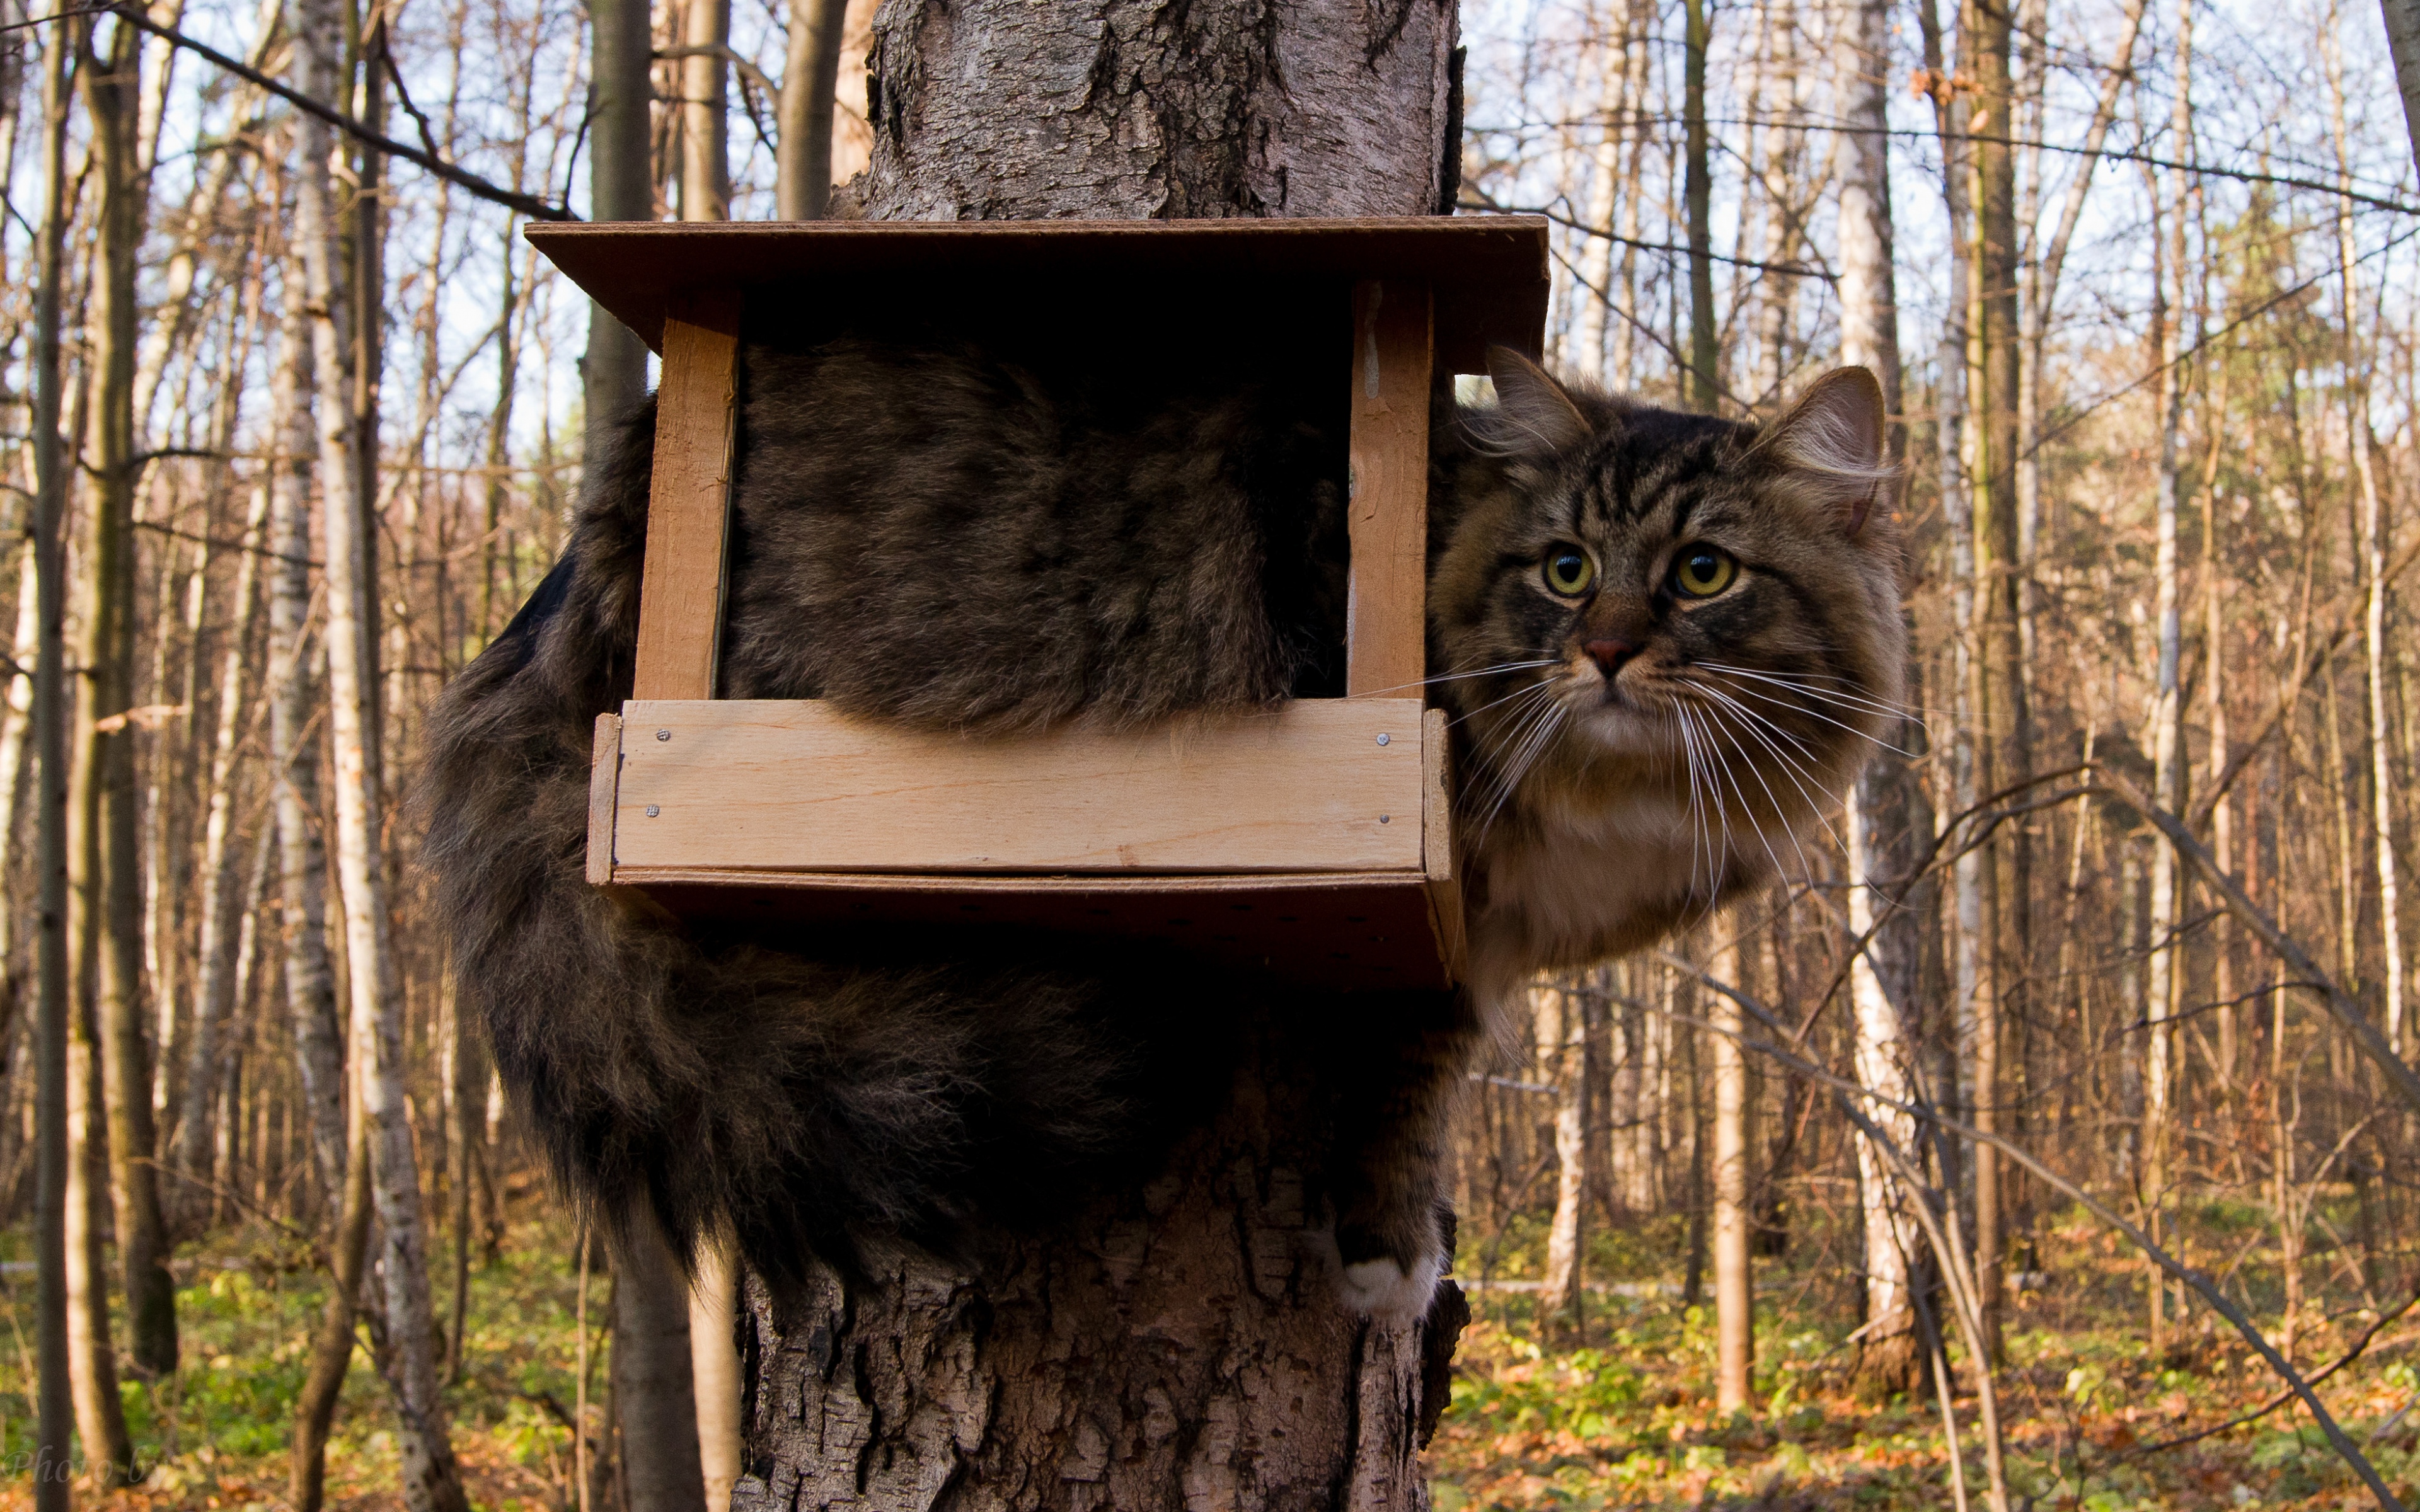 Cat In Bird's House Funny Tree Picture